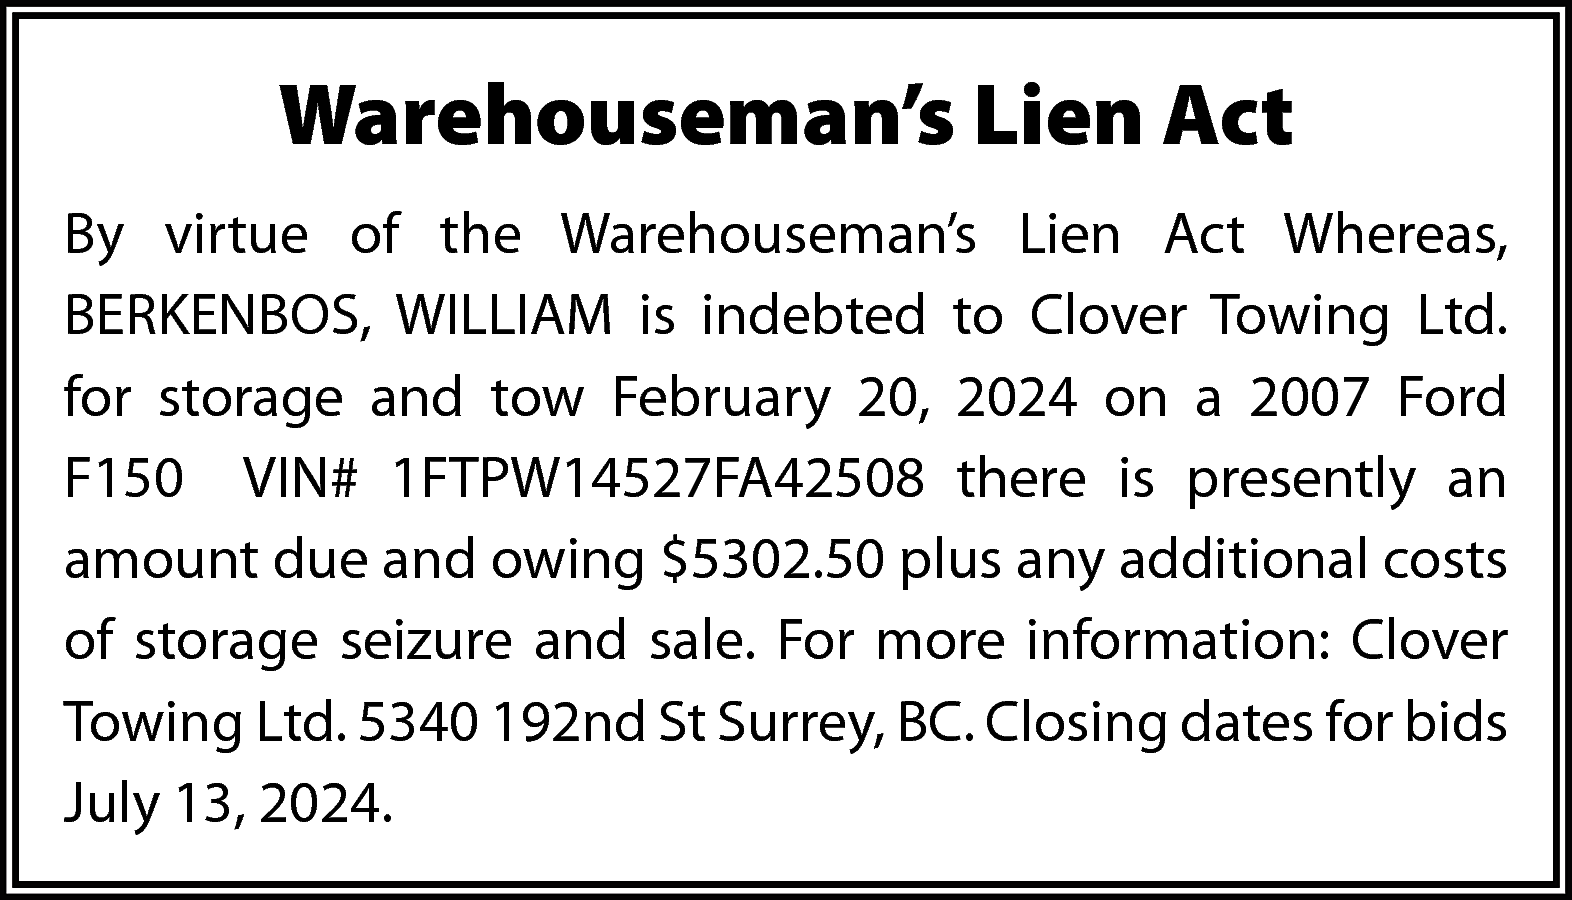 Warehouseman’s Lien Act <br>By virtue  Warehouseman’s Lien Act  By virtue of the Warehouseman’s Lien Act Whereas,  BERKENBOS, WILLIAM is indebted to Clover Towing Ltd.  for storage and tow February 20, 2024 on a 2007 Ford  F150 VIN# 1FTPW14527FA42508 there is presently an  amount due and owing $5302.50 plus any additional costs  of storage seizure and sale. For more information: Clover  Towing Ltd. 5340 192nd St Surrey, BC. Closing dates for bids  July 13, 2024.    